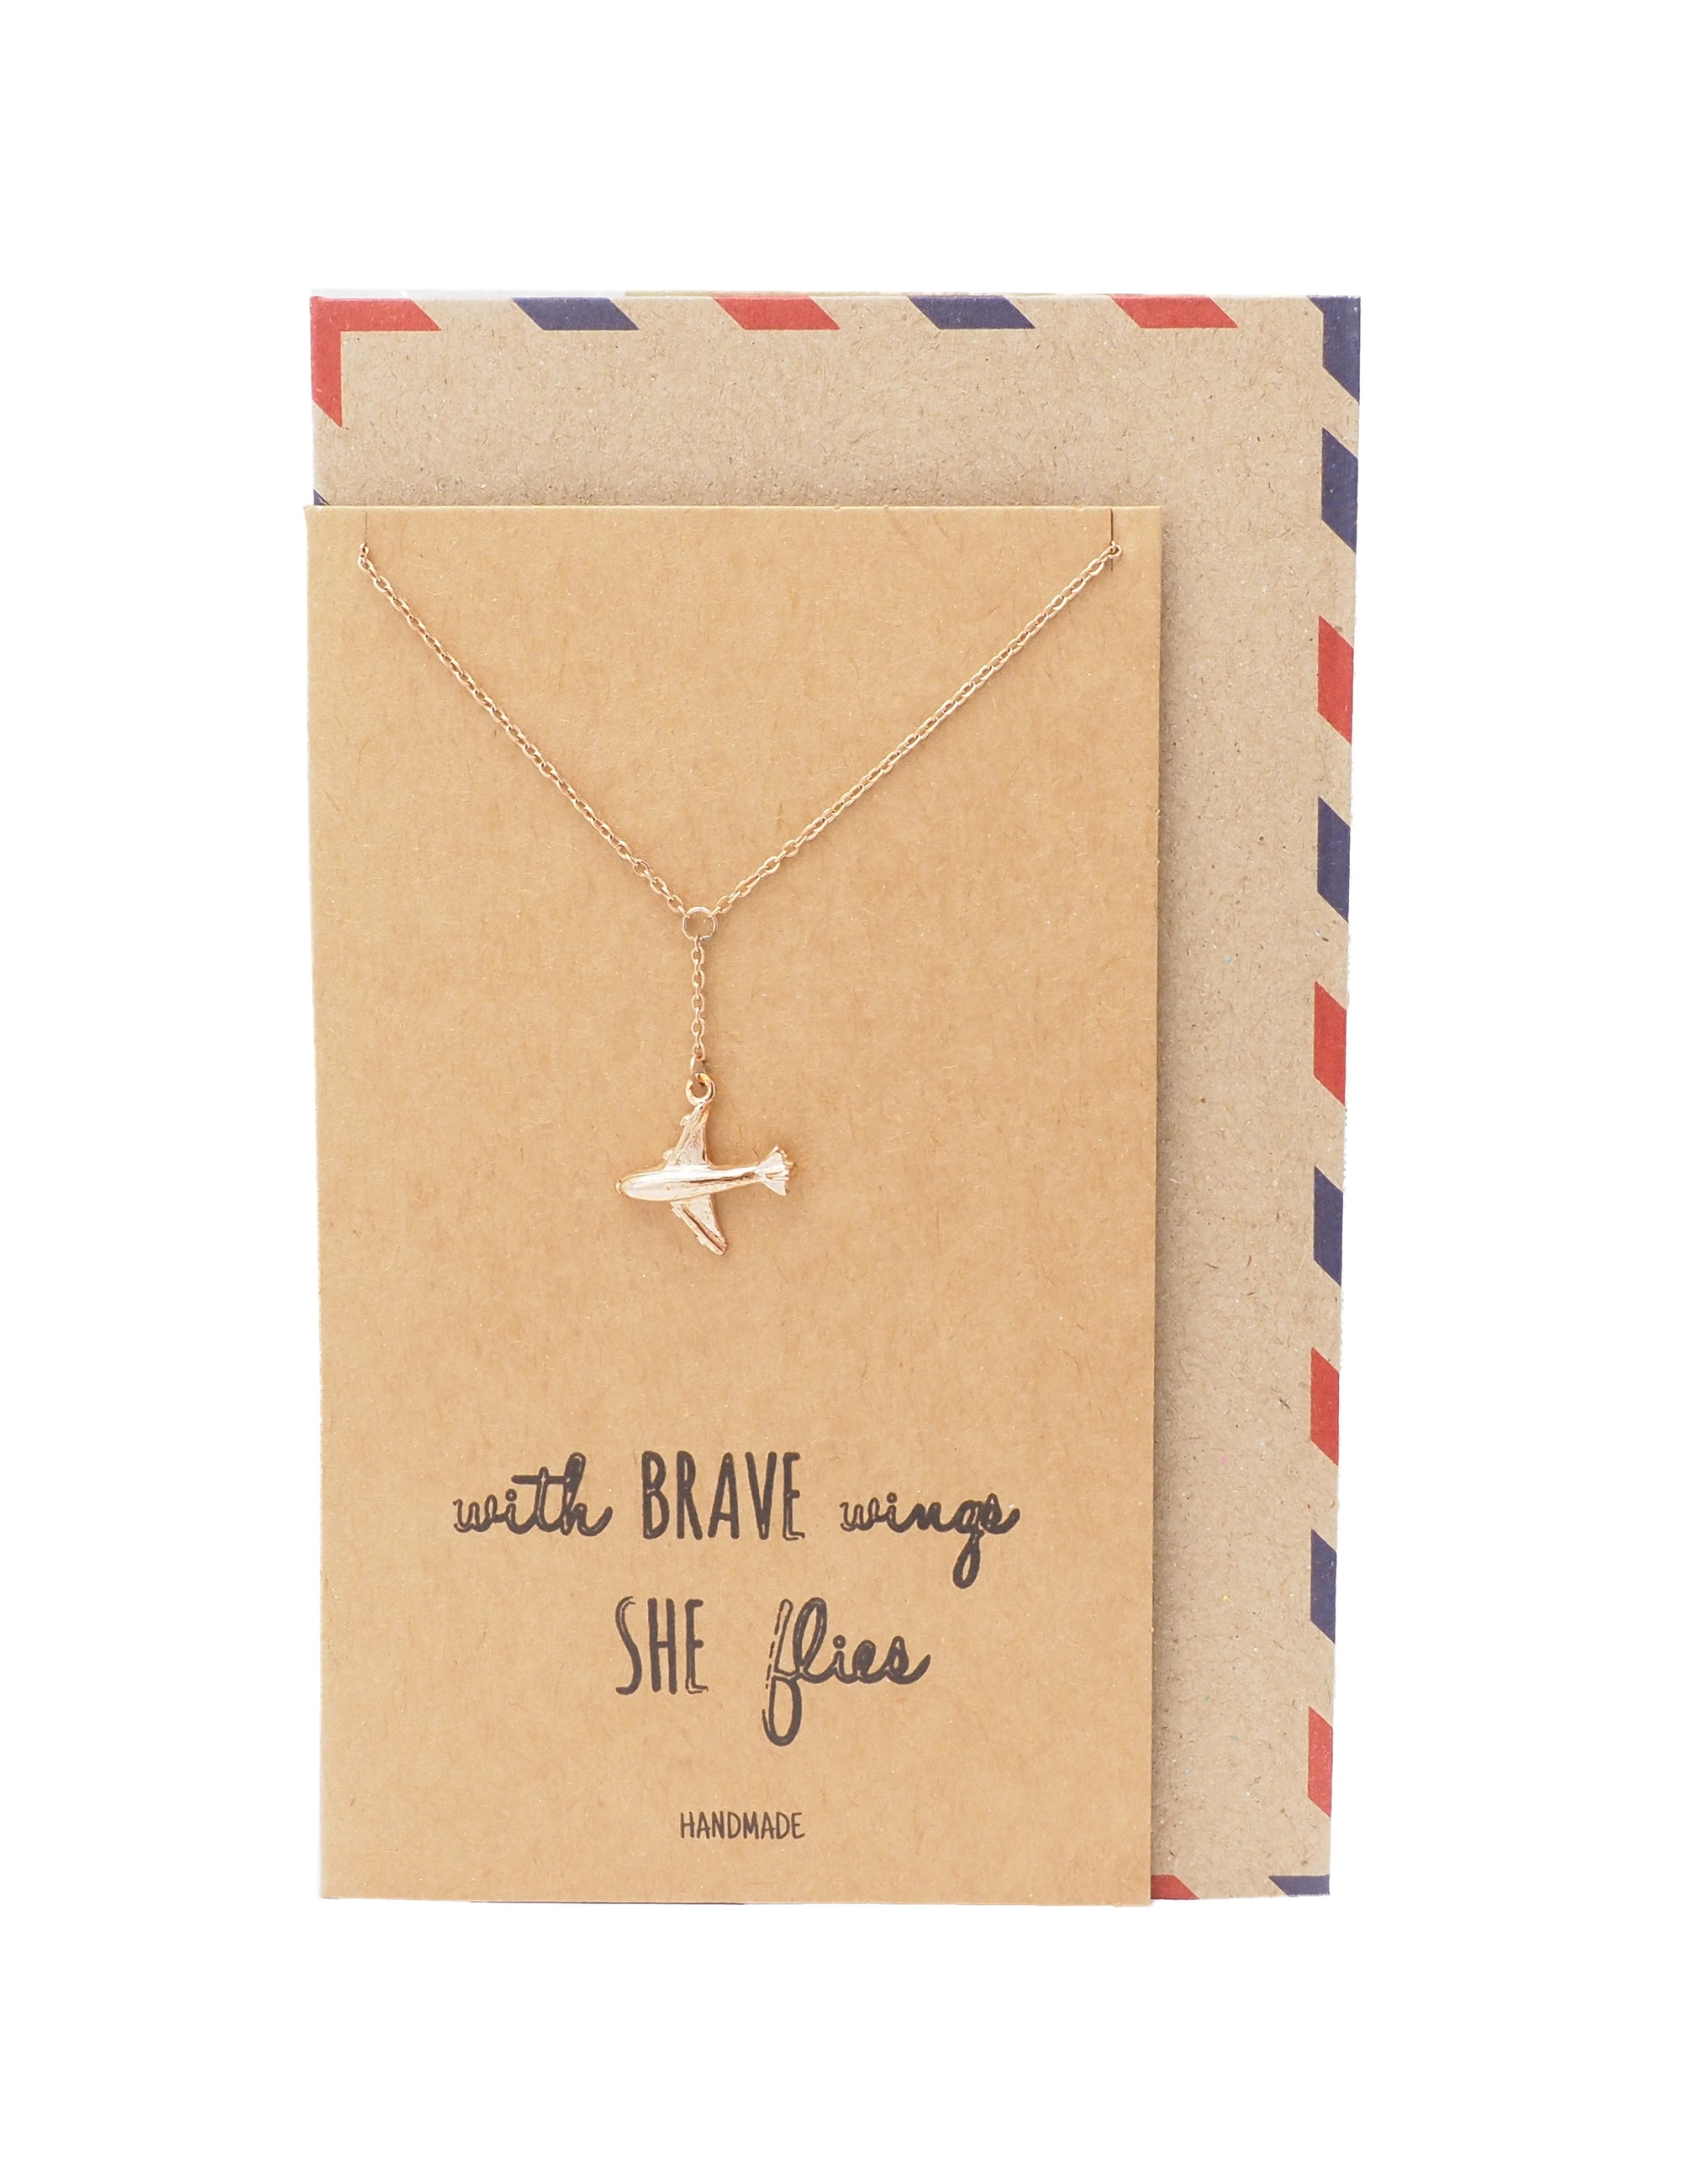 Gold Paper Plane Charm Necklace 1st Anniversary Gift Paper 